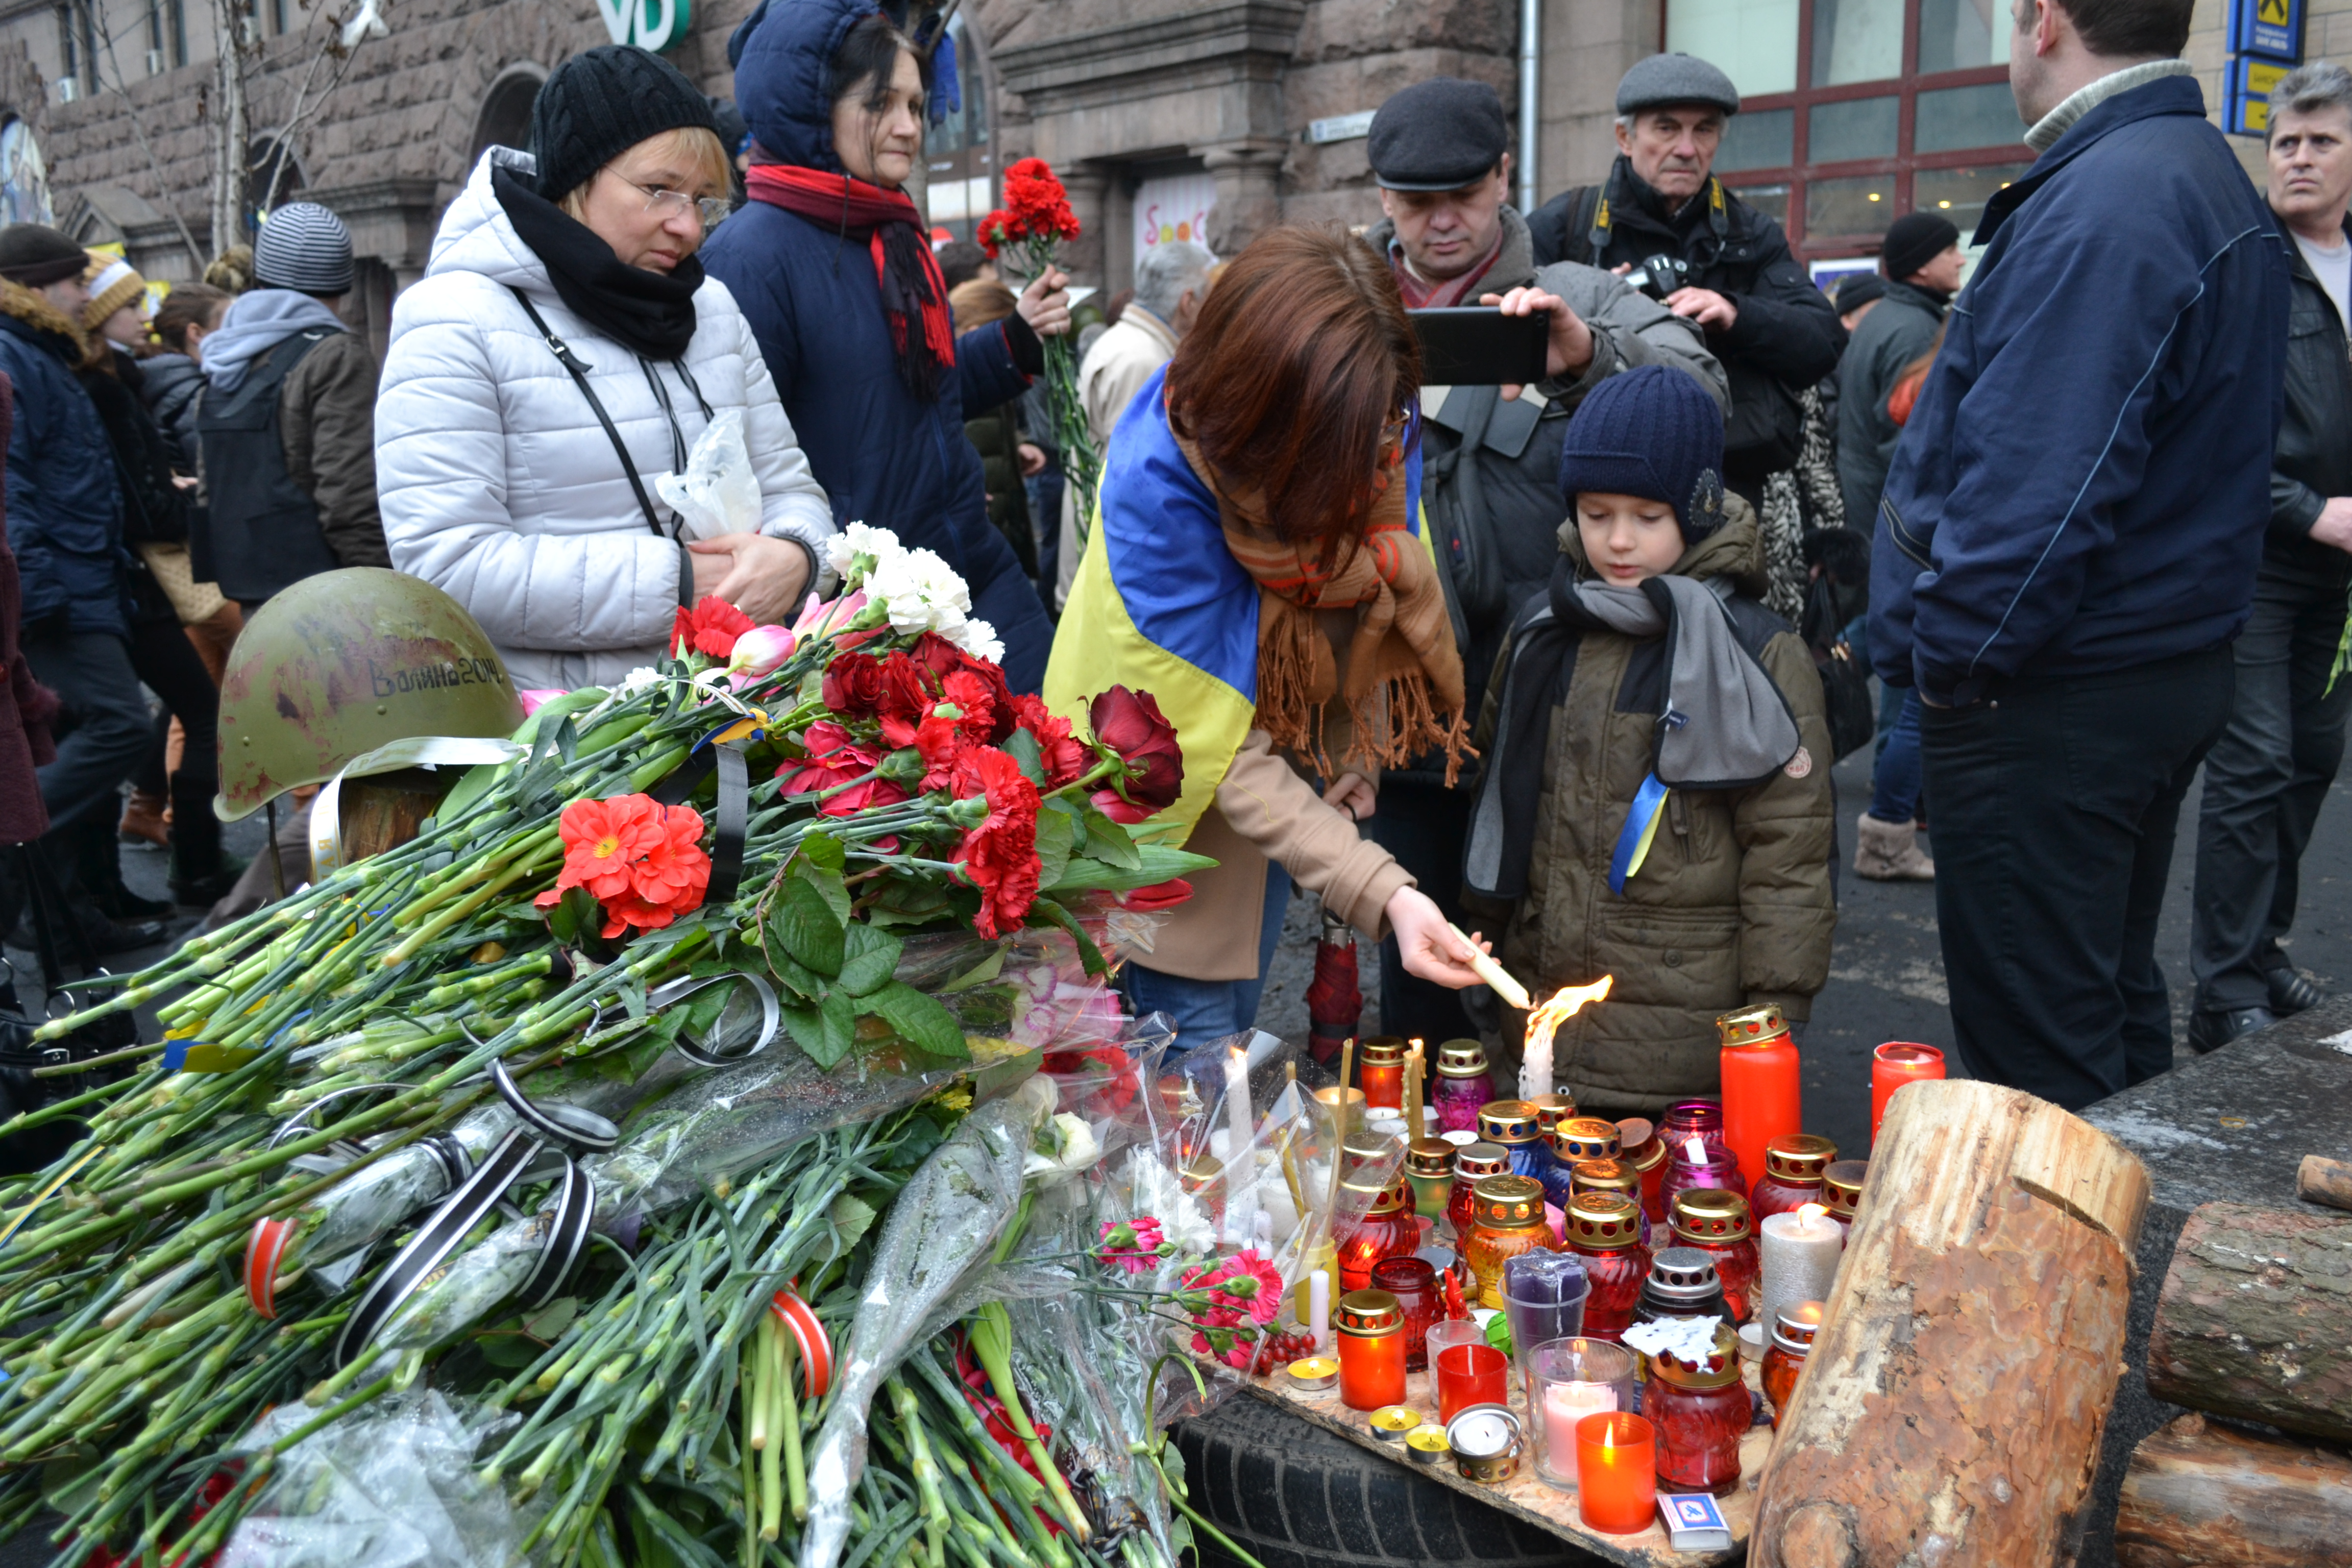 Days after the violence on Maidan ended, people flocked to Maidan, February 22, 2014.